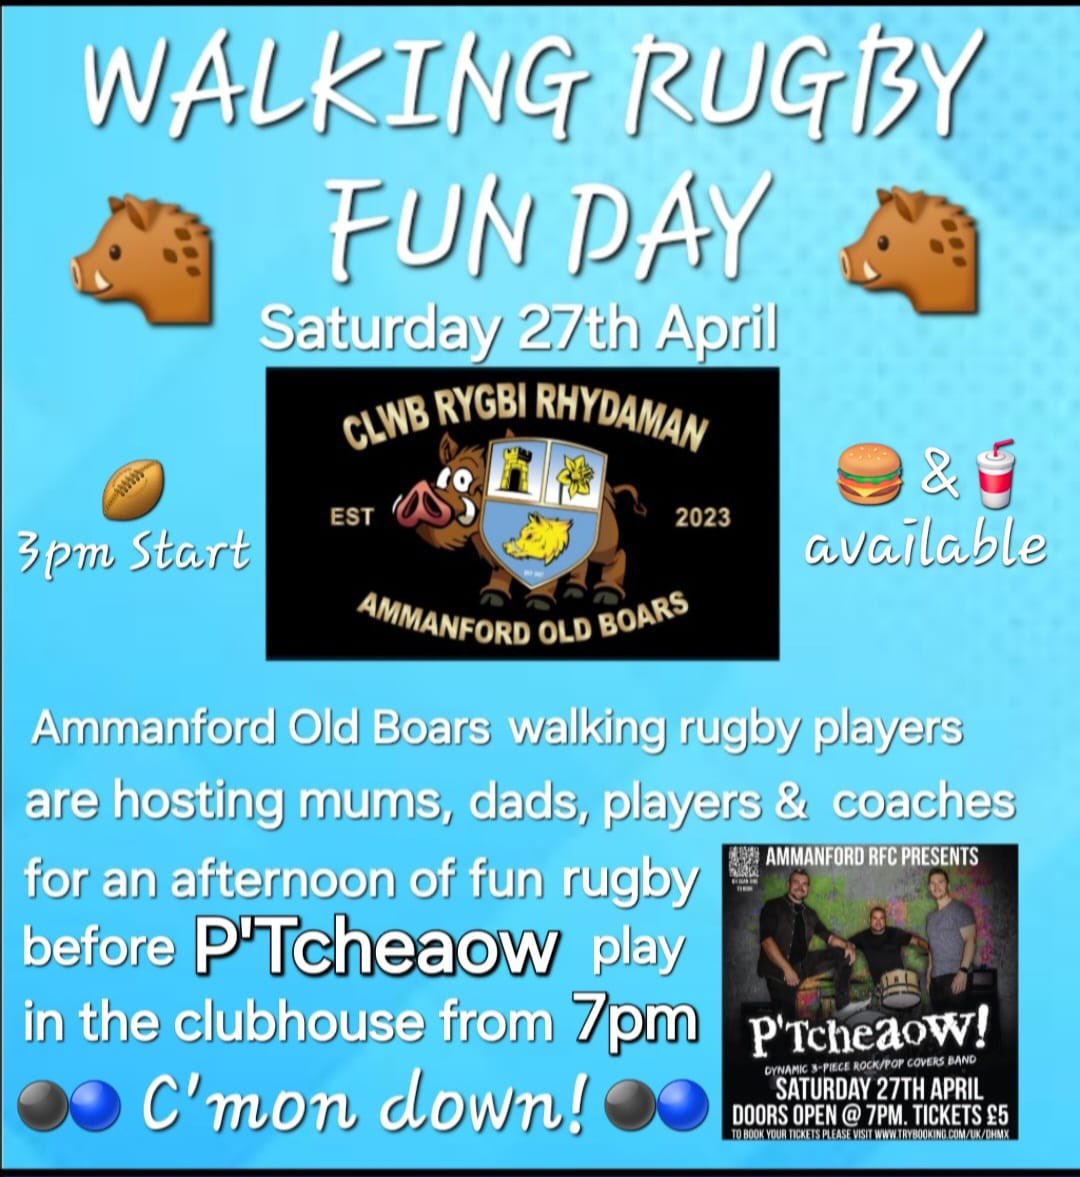 ⚫️WALKING RUGBY FUNDAY🔵 Saturday 27th April to celebrate a successful season for our Walking Rugby squad,we’re holding a festival+BBQ at the rec, with fantastic local band @ptcheaow from 7pm,get involved contact chrisdavies3023@btinternet.com or contact on X @chrisdavies3023